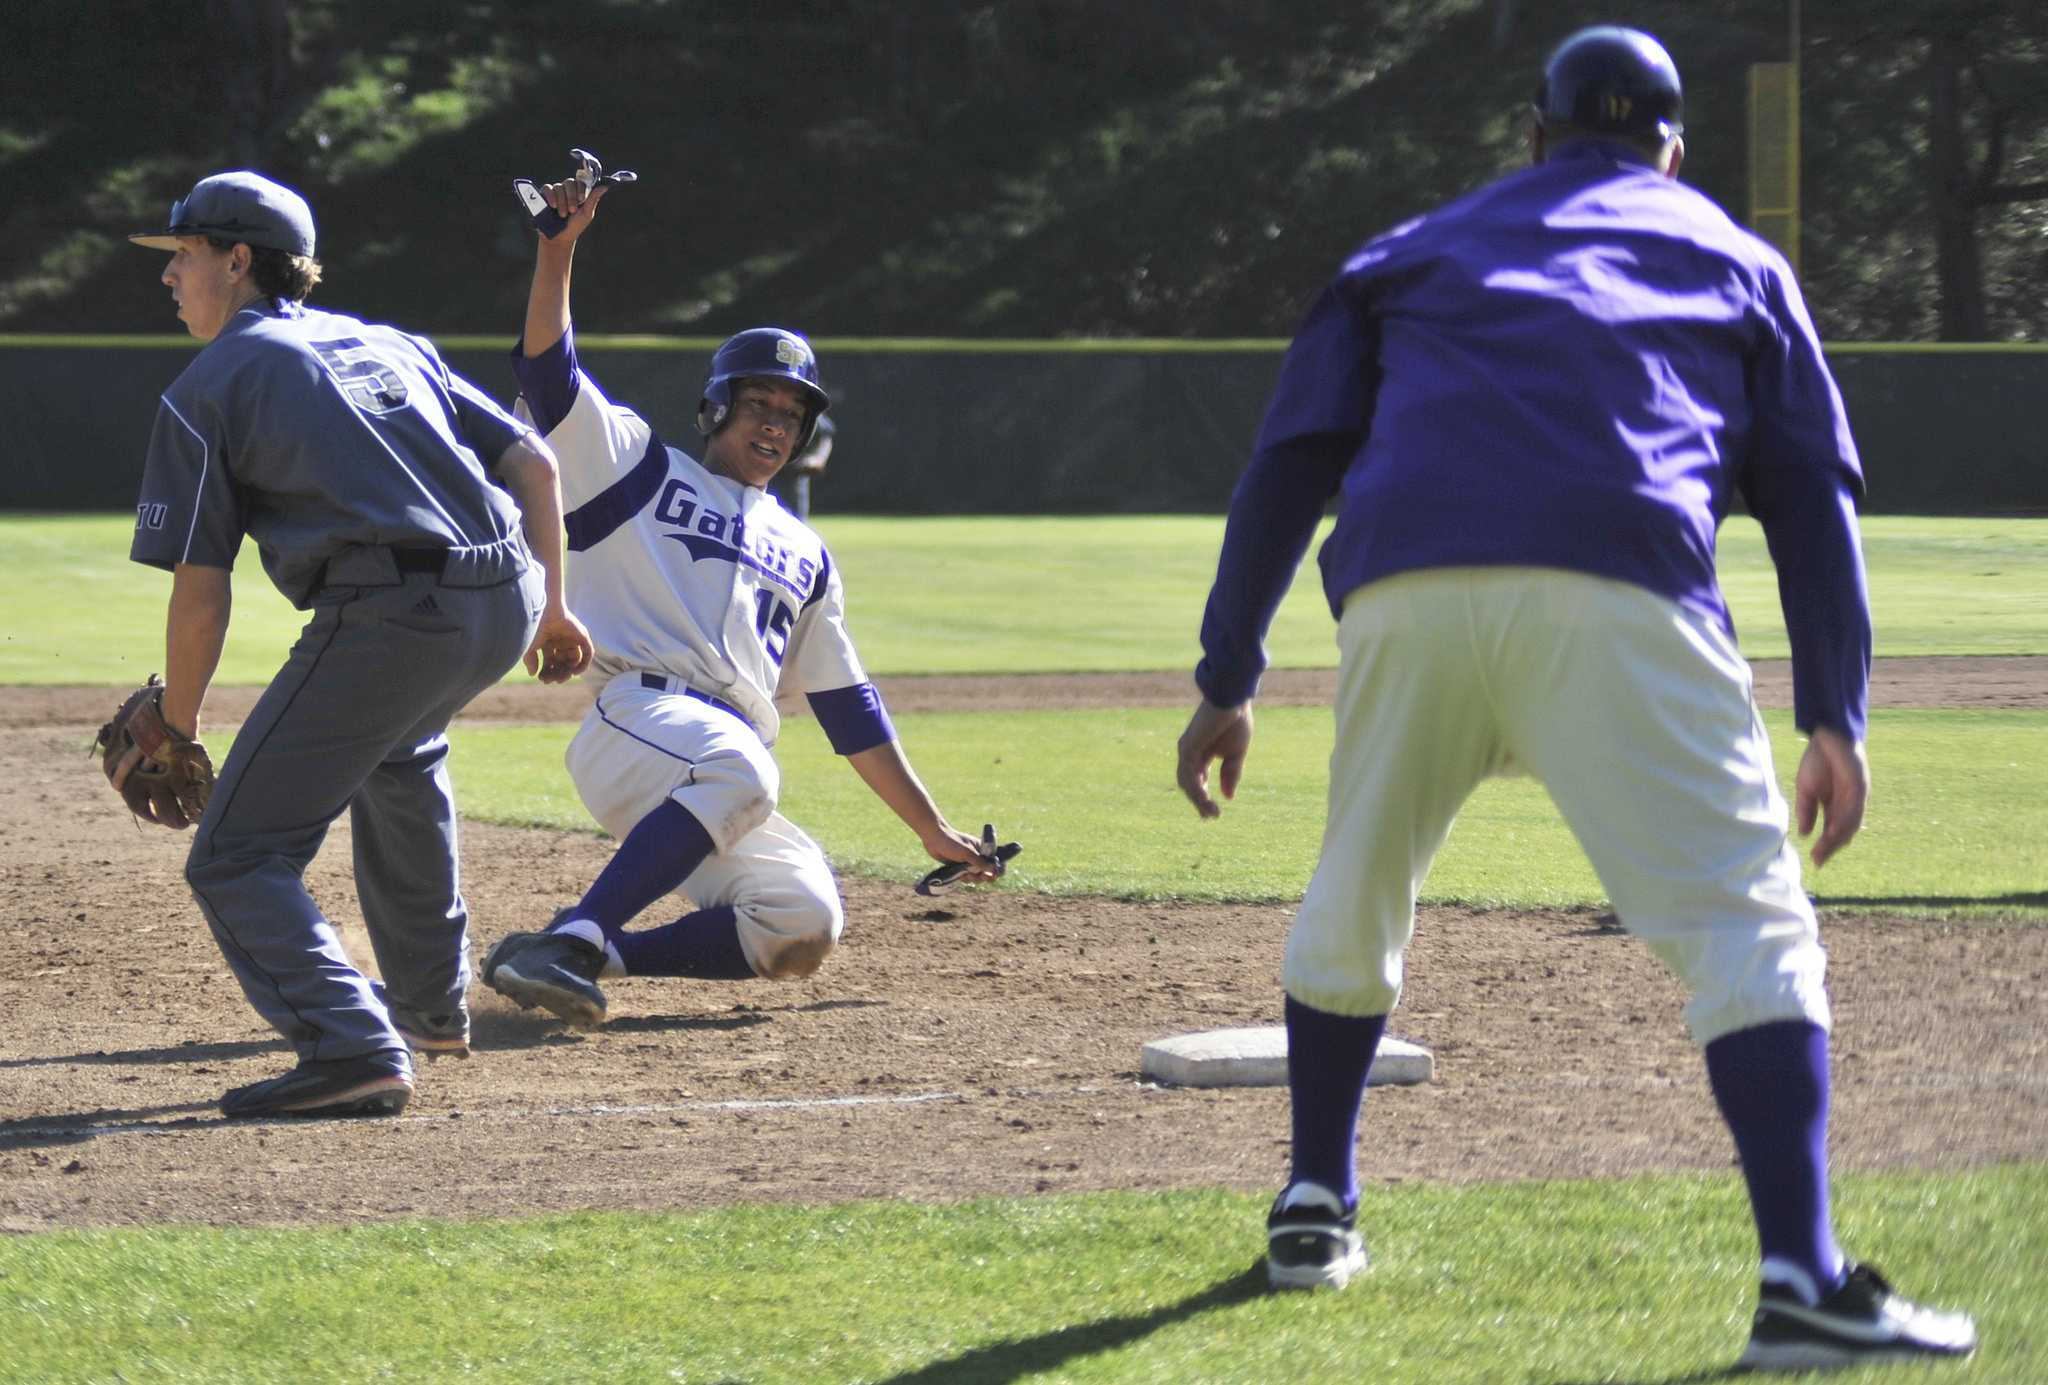 SF State Gators player Joseph Chedid (#15) slides into third base during a game against the Academy of Art Urban Knights on Tuesday, April 14, 2015. (Sara Gobets / Xpress)